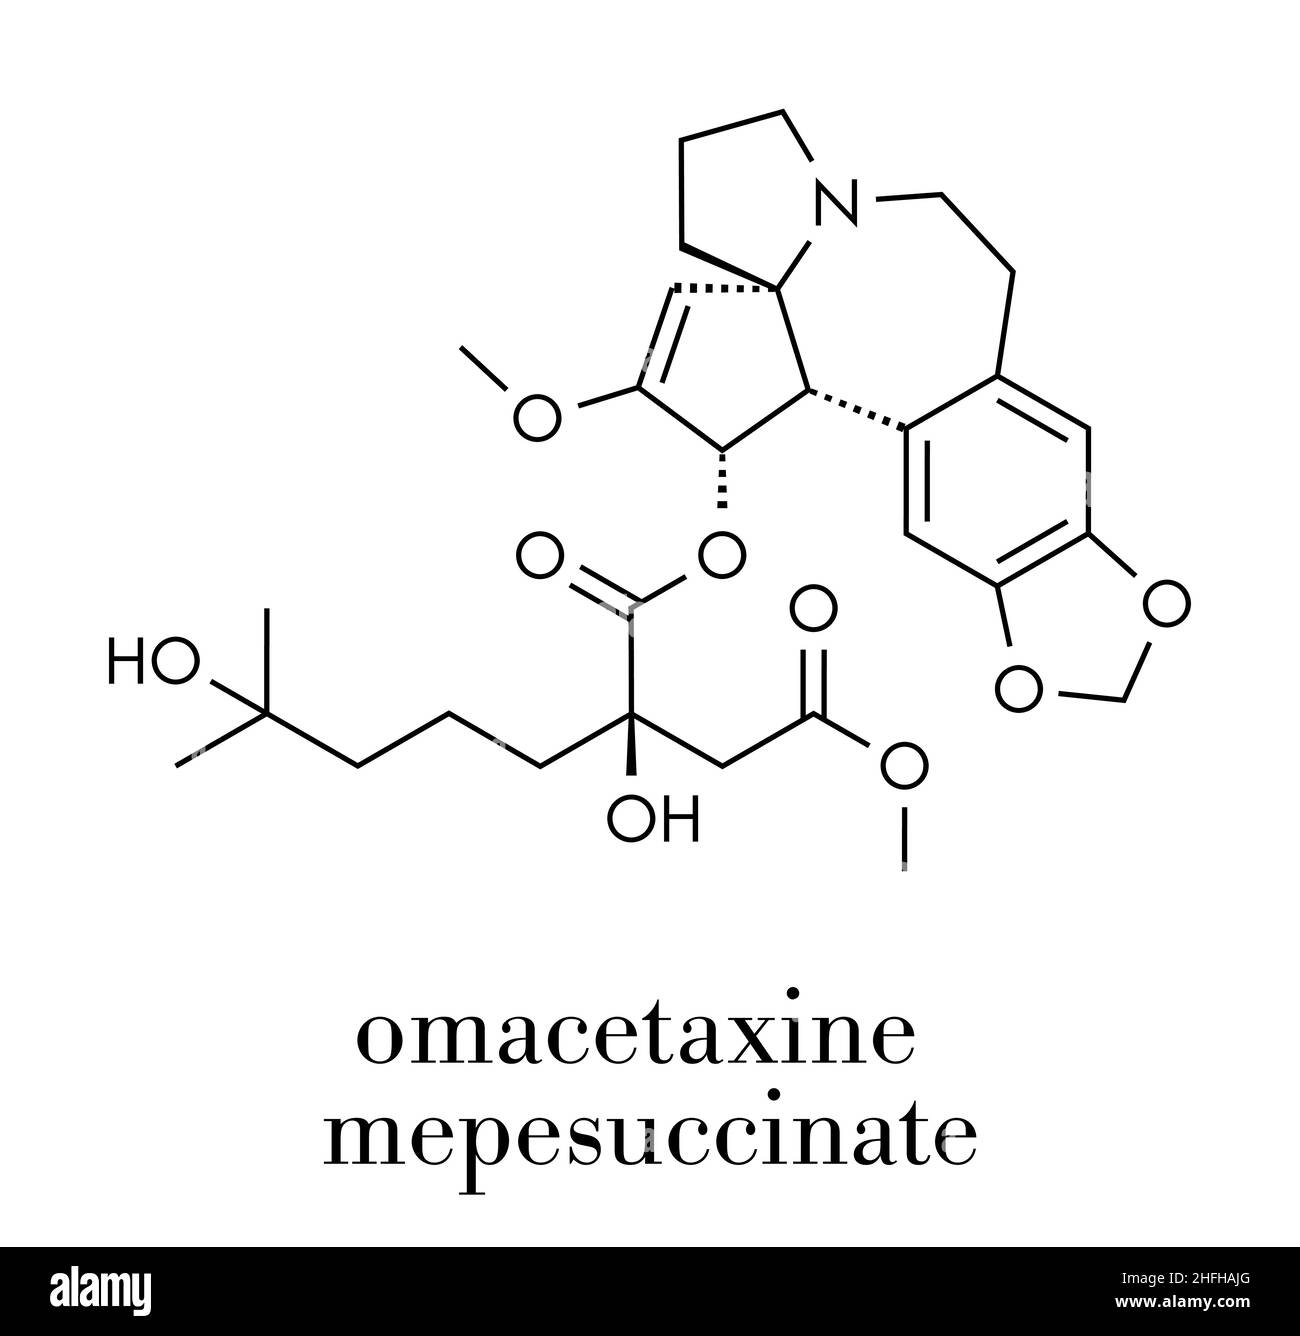 Omacetaxine mepesuccinate cancer drug molecule. Used in treatment of chronic myelogenous leukemia (CML). Skeletal formula. Stock Vector